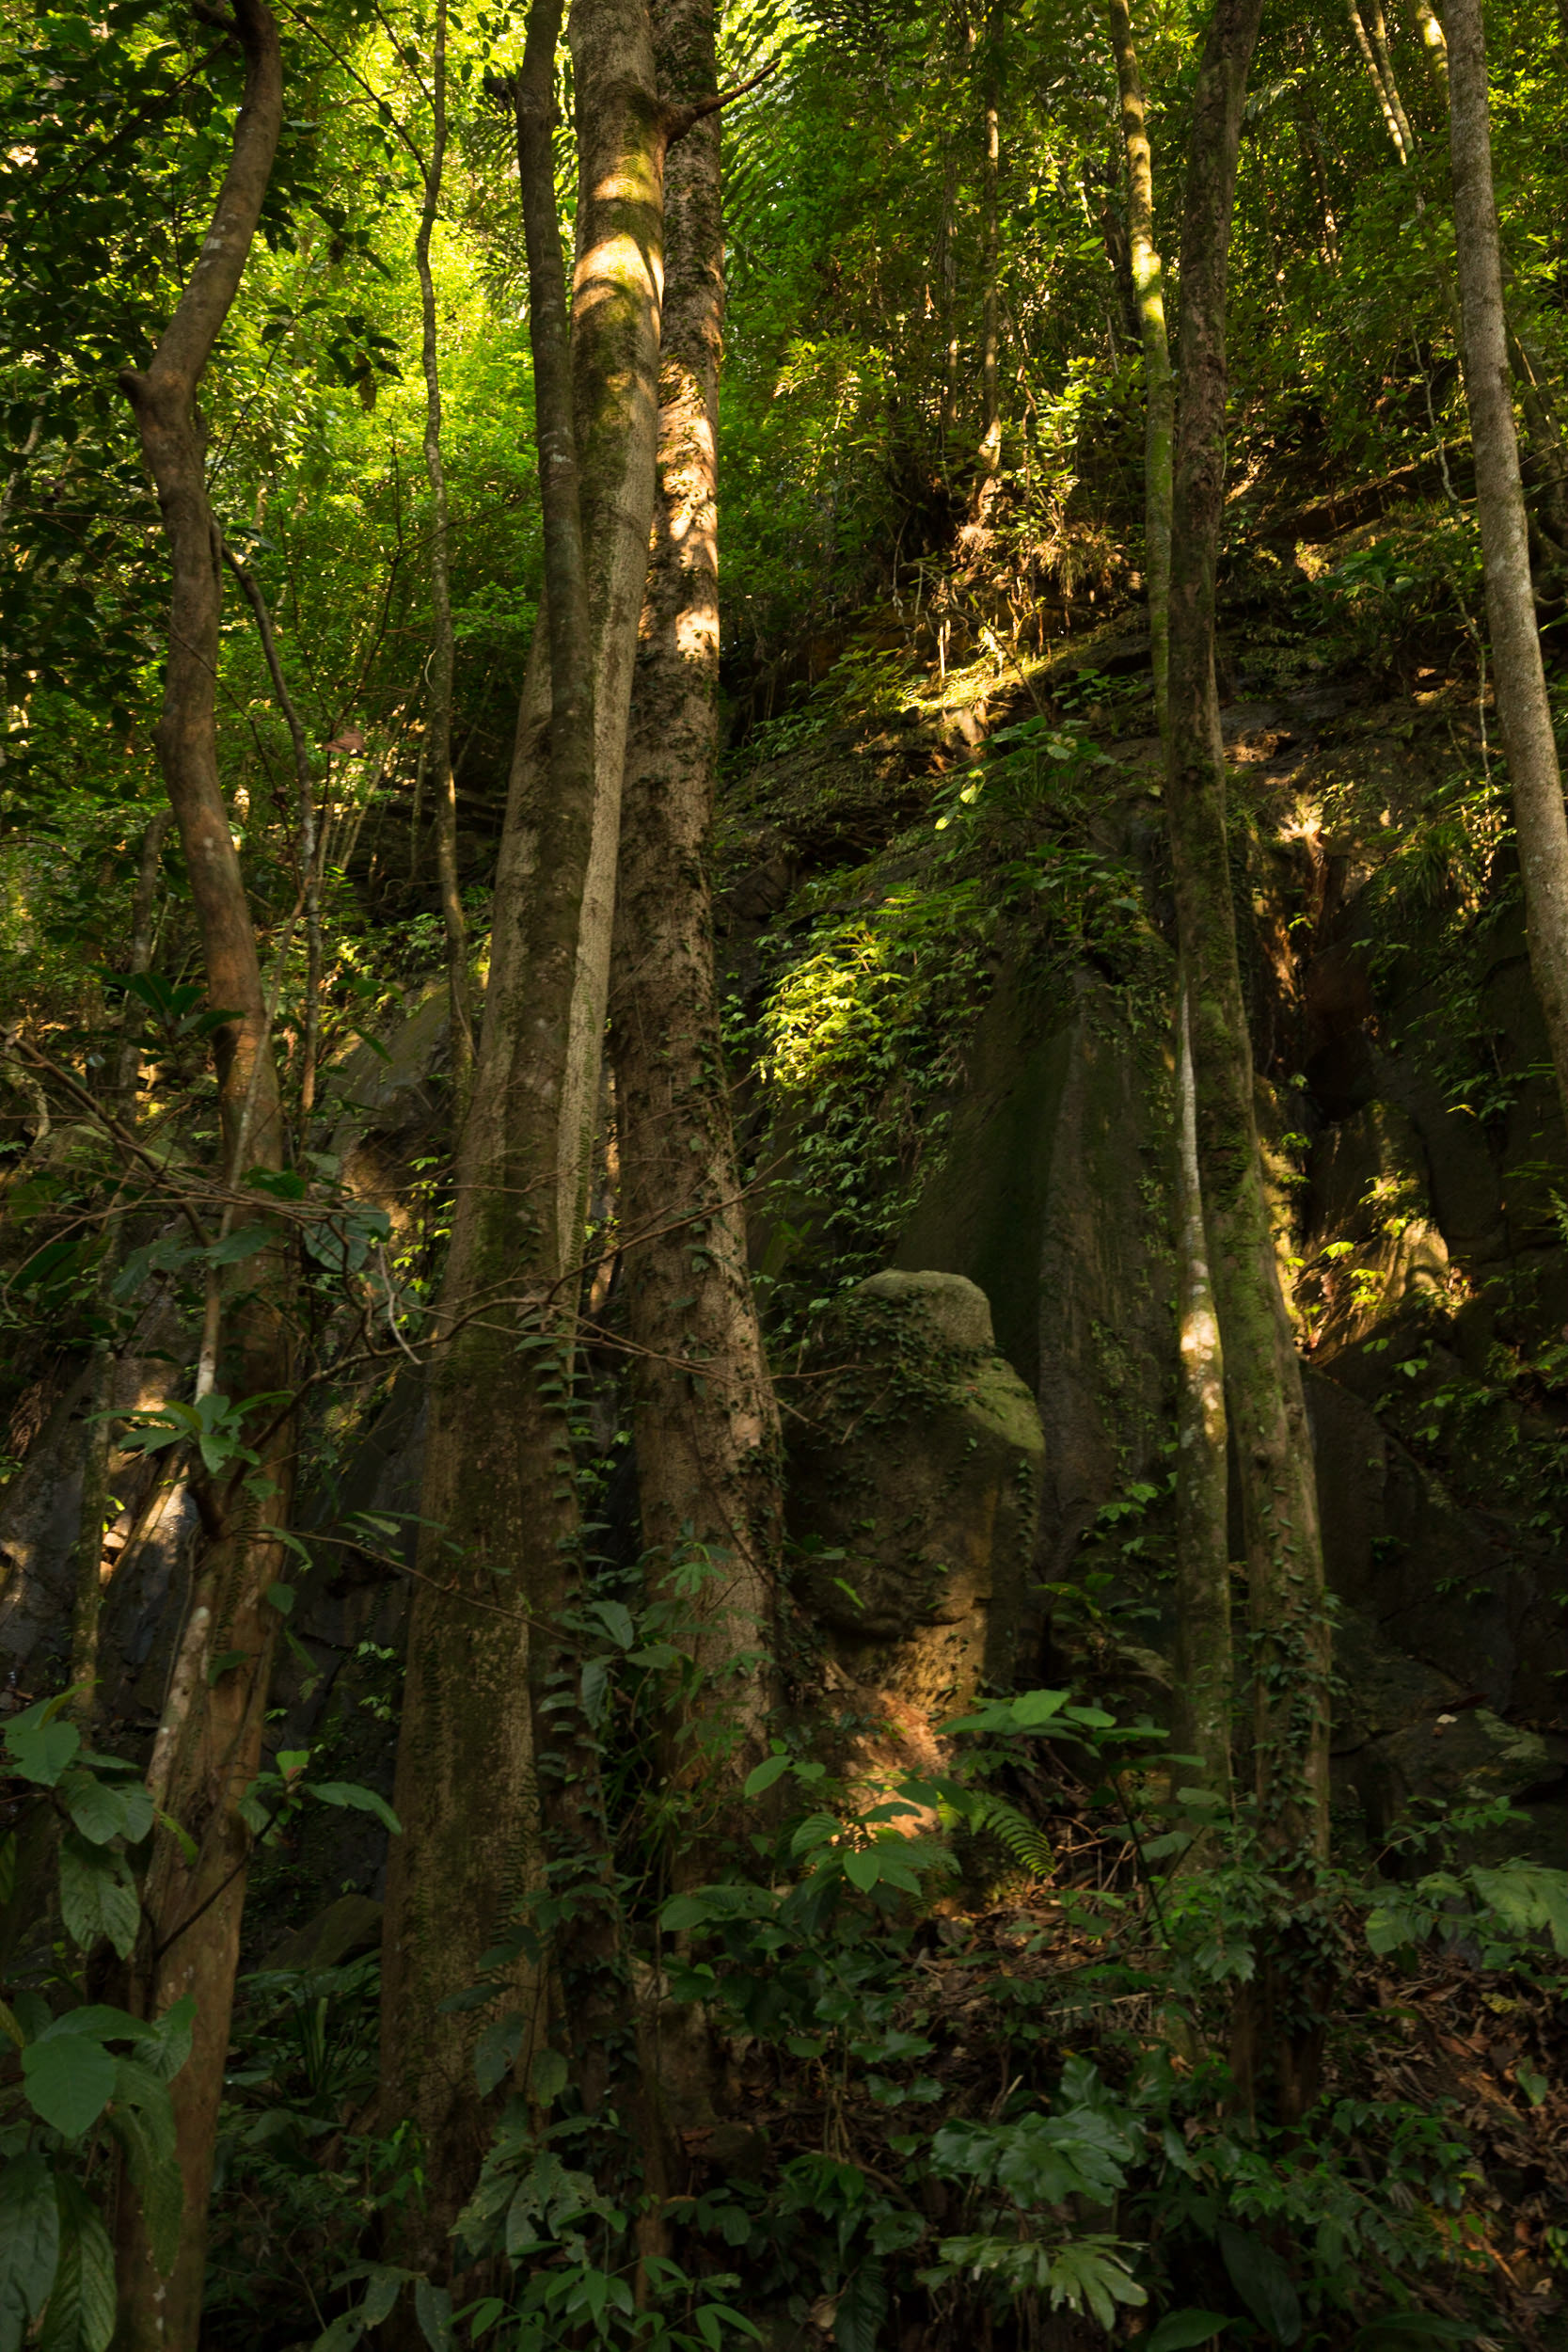  The jungle Borneo is extremely dense, hot and humid, with only a few anomalous sun rays making it to the ground. 